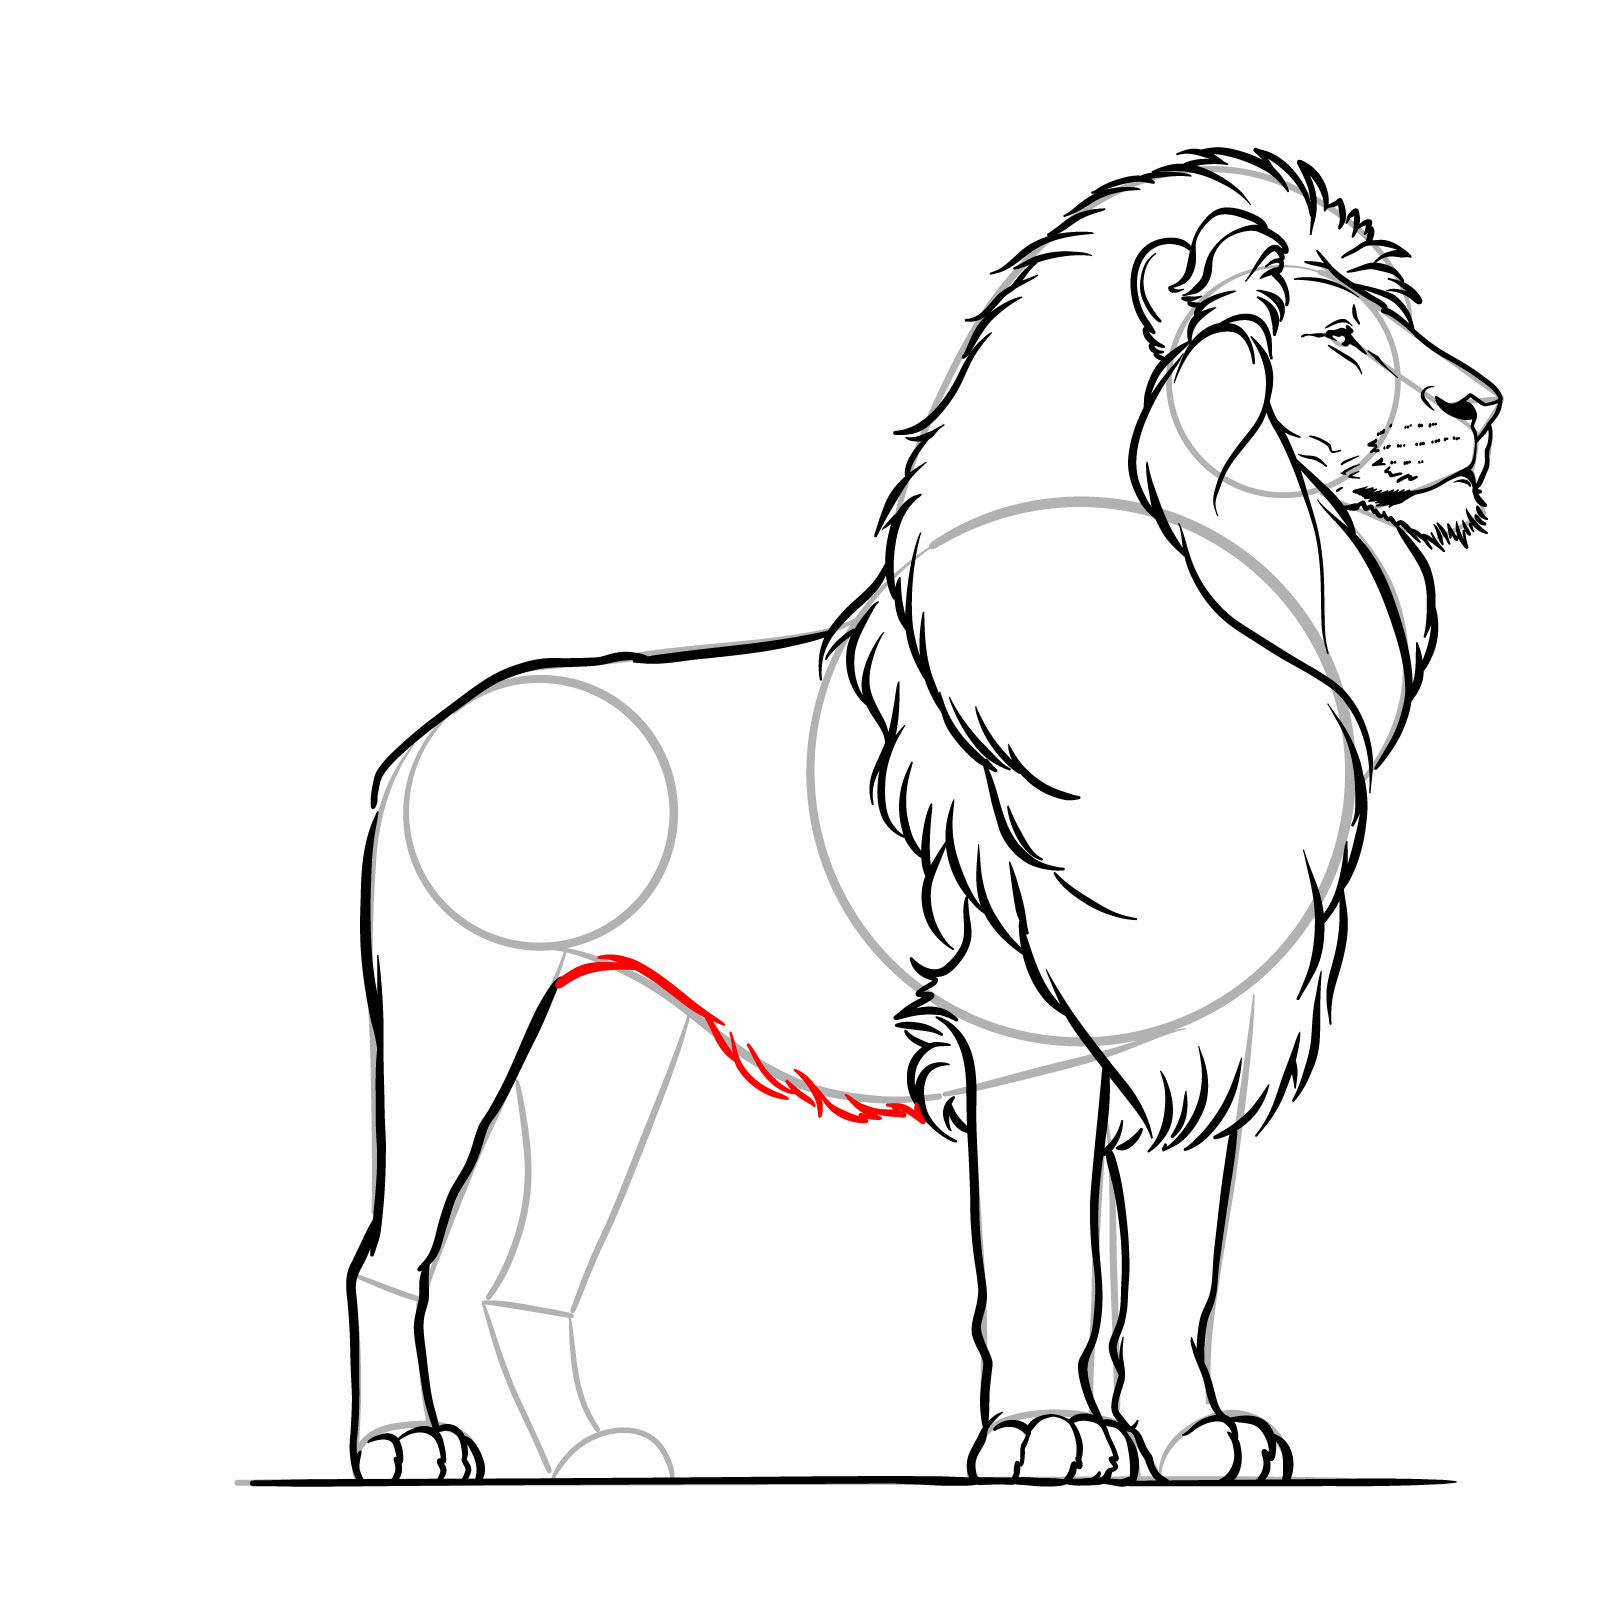 Drawing the underside of a standing lion's body - step 16